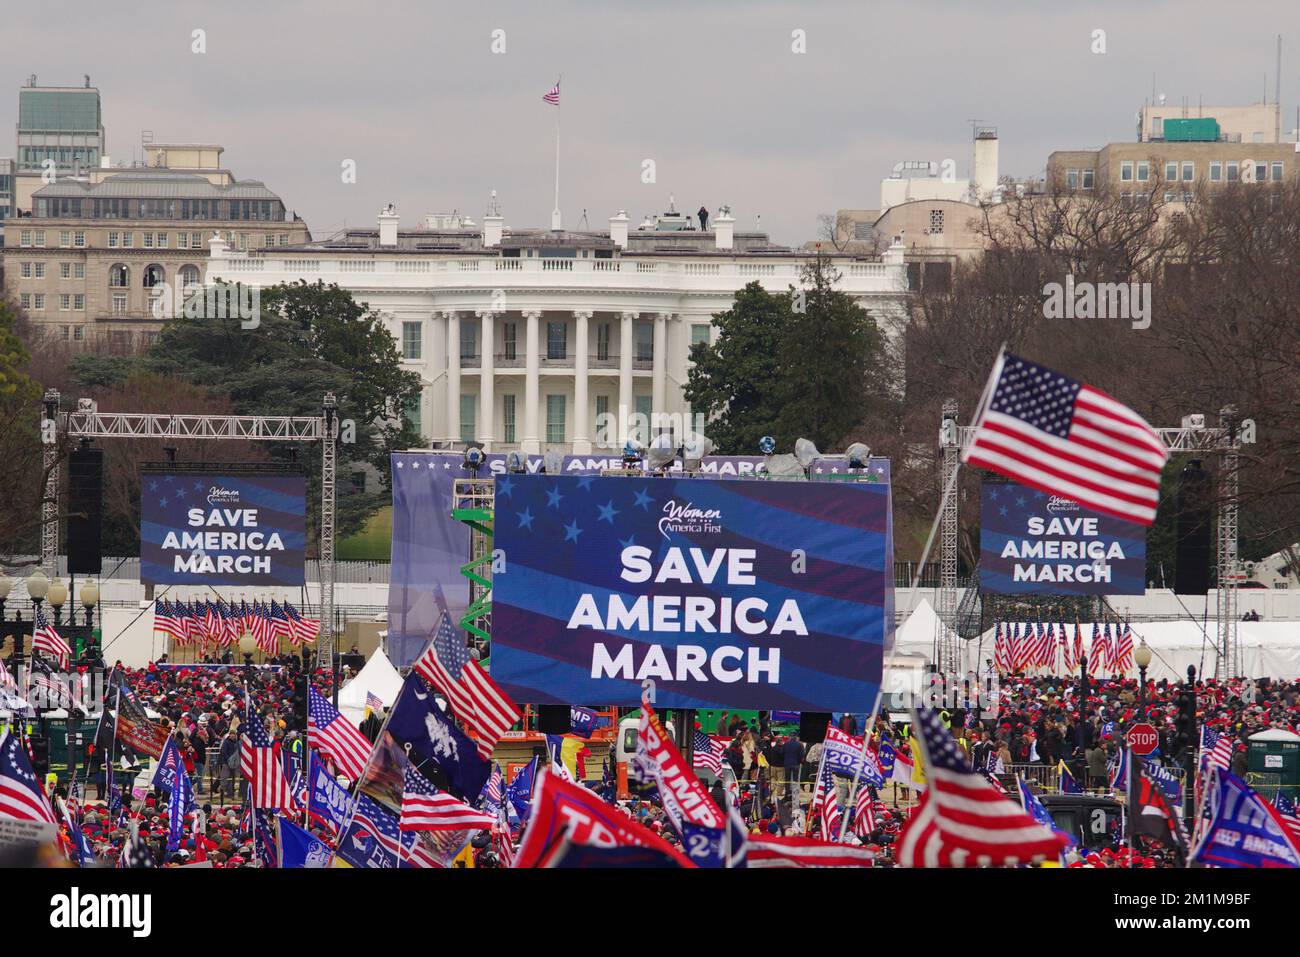 The White House serves as a backdrop for the then-U.S. President Donald Trump's 'Stop the Steal' rally that preceded the Capitol insurrection on Janua Stock Photo